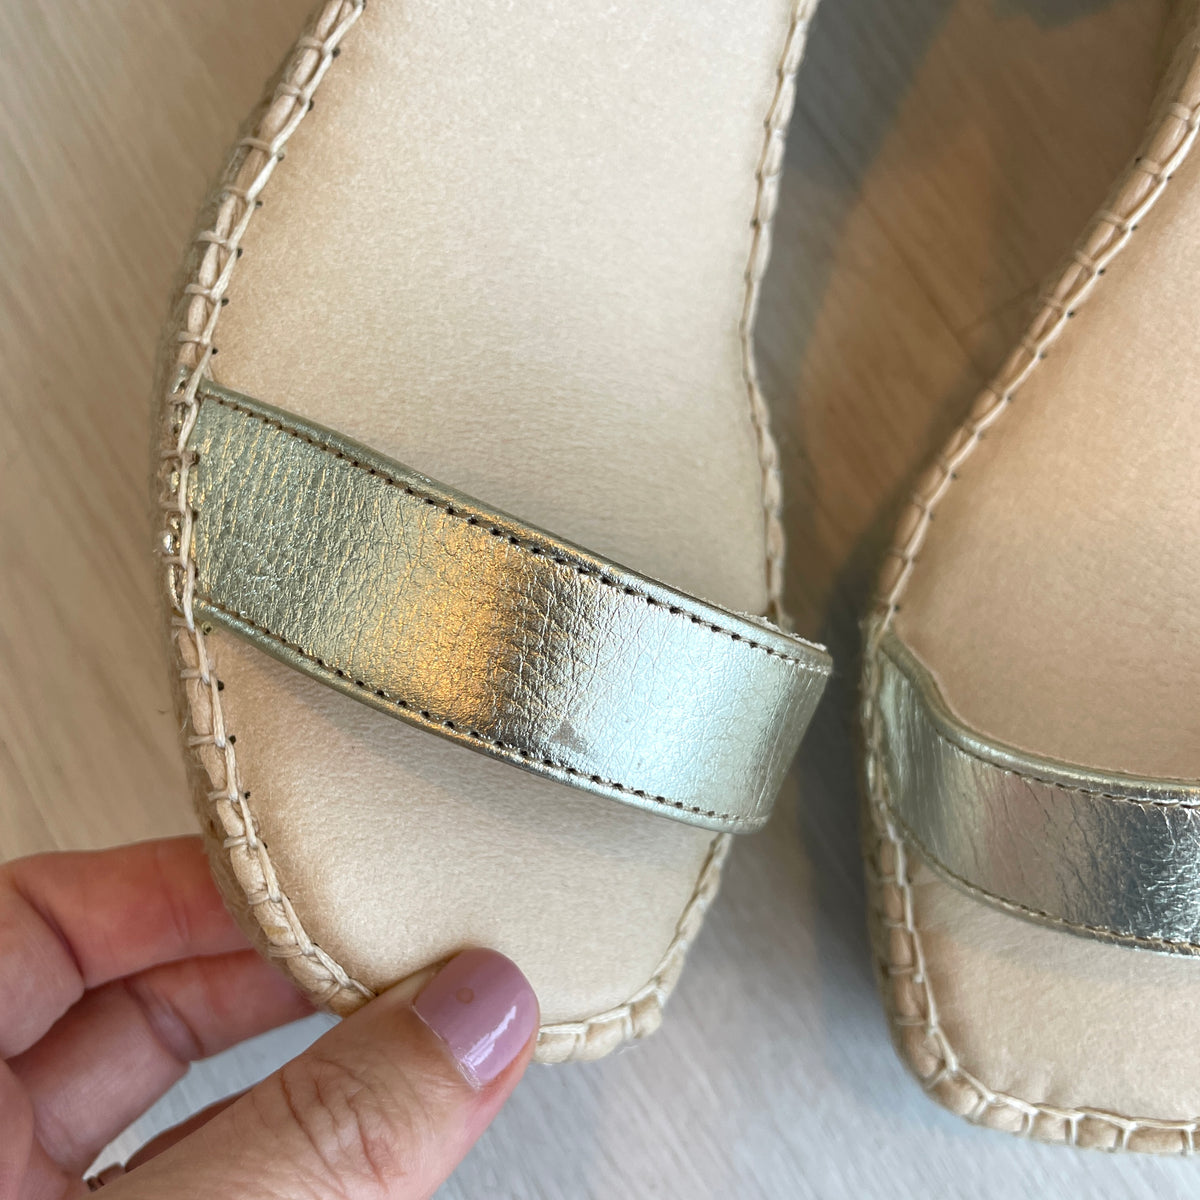 Sienna Espadrille Wedge in Champagne - Outlet Item - Size 39